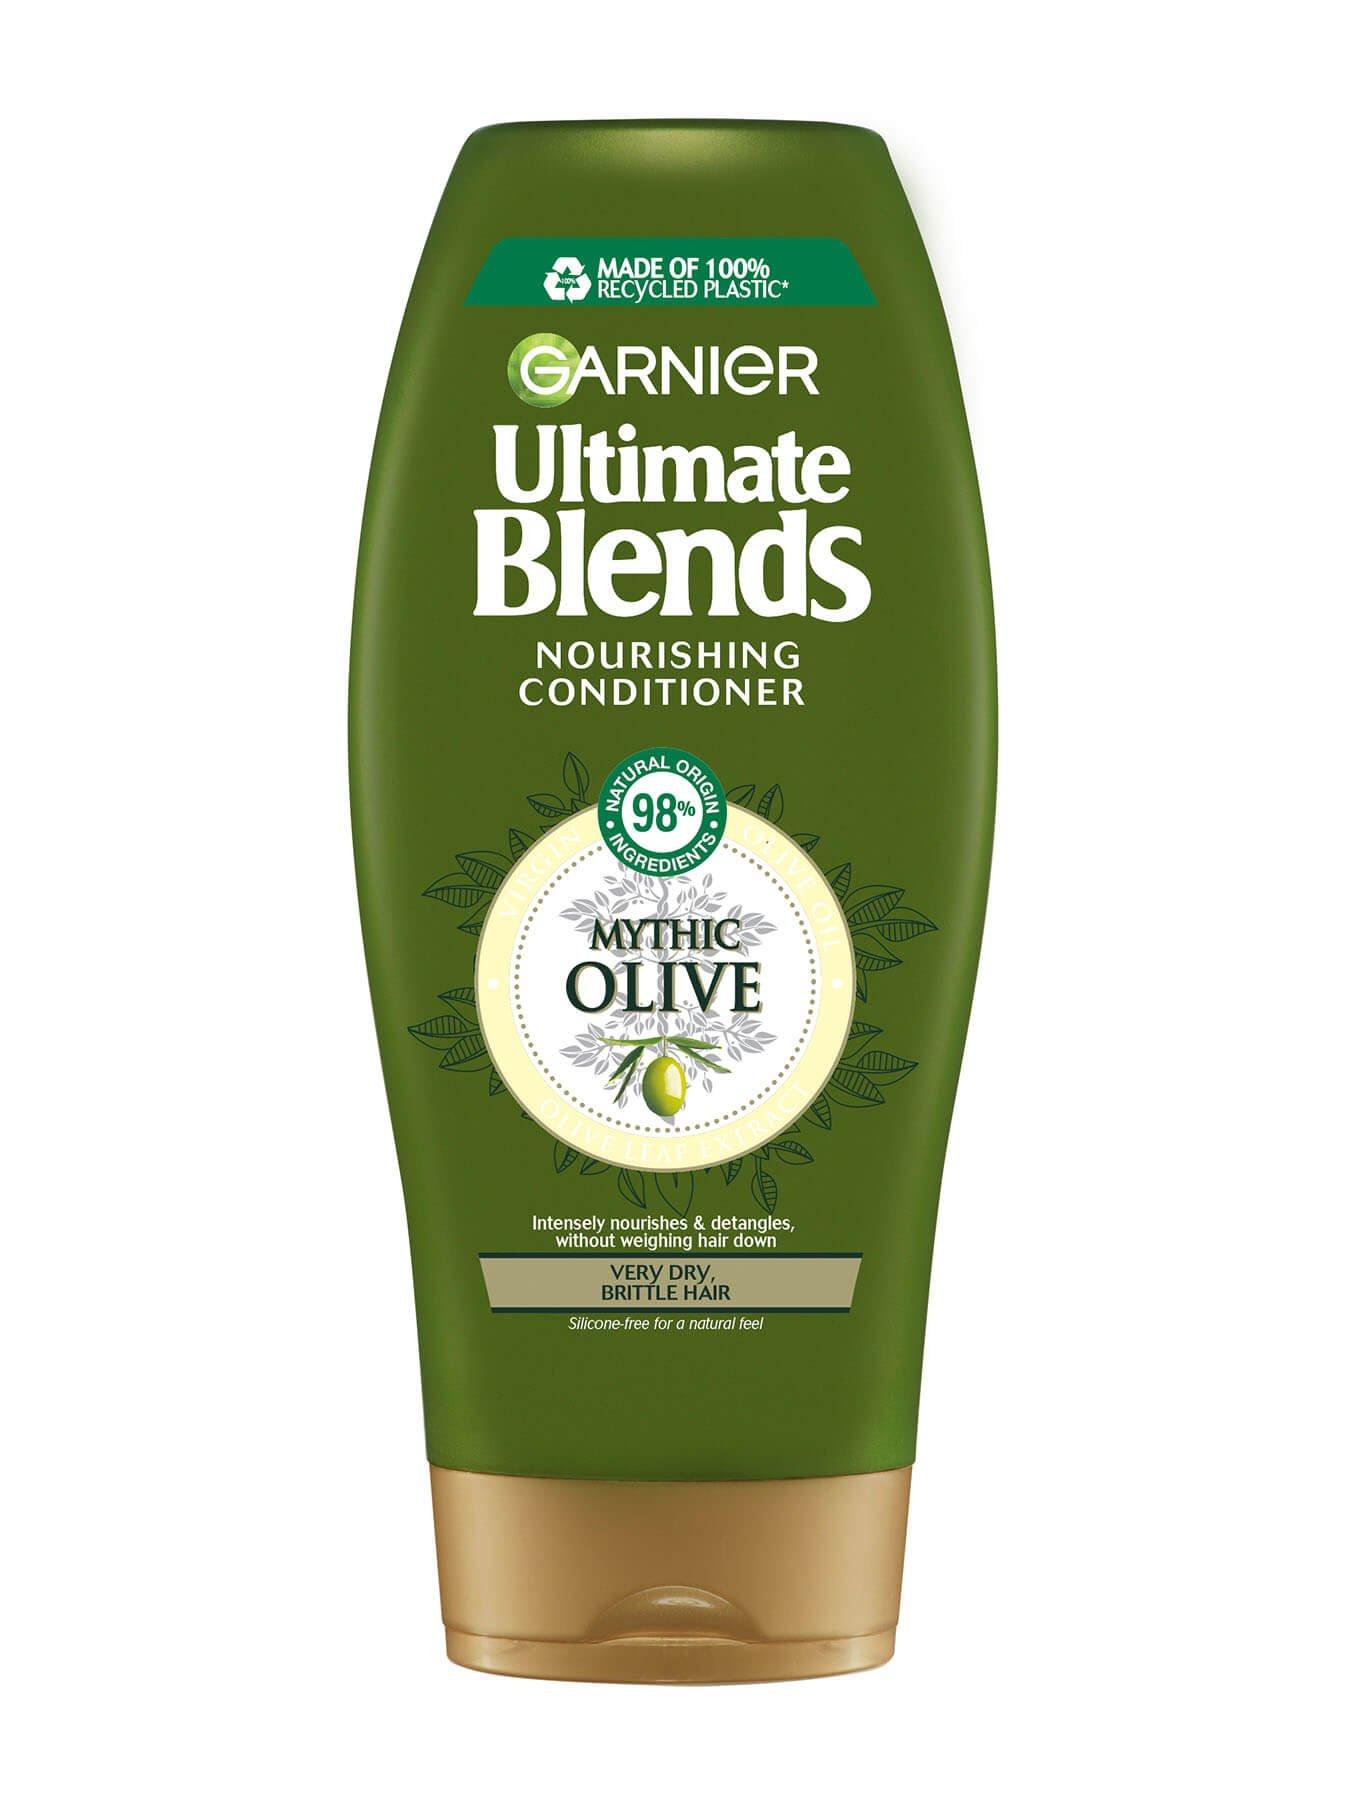 Mythic Olive Shampoo Conditioner front of pack